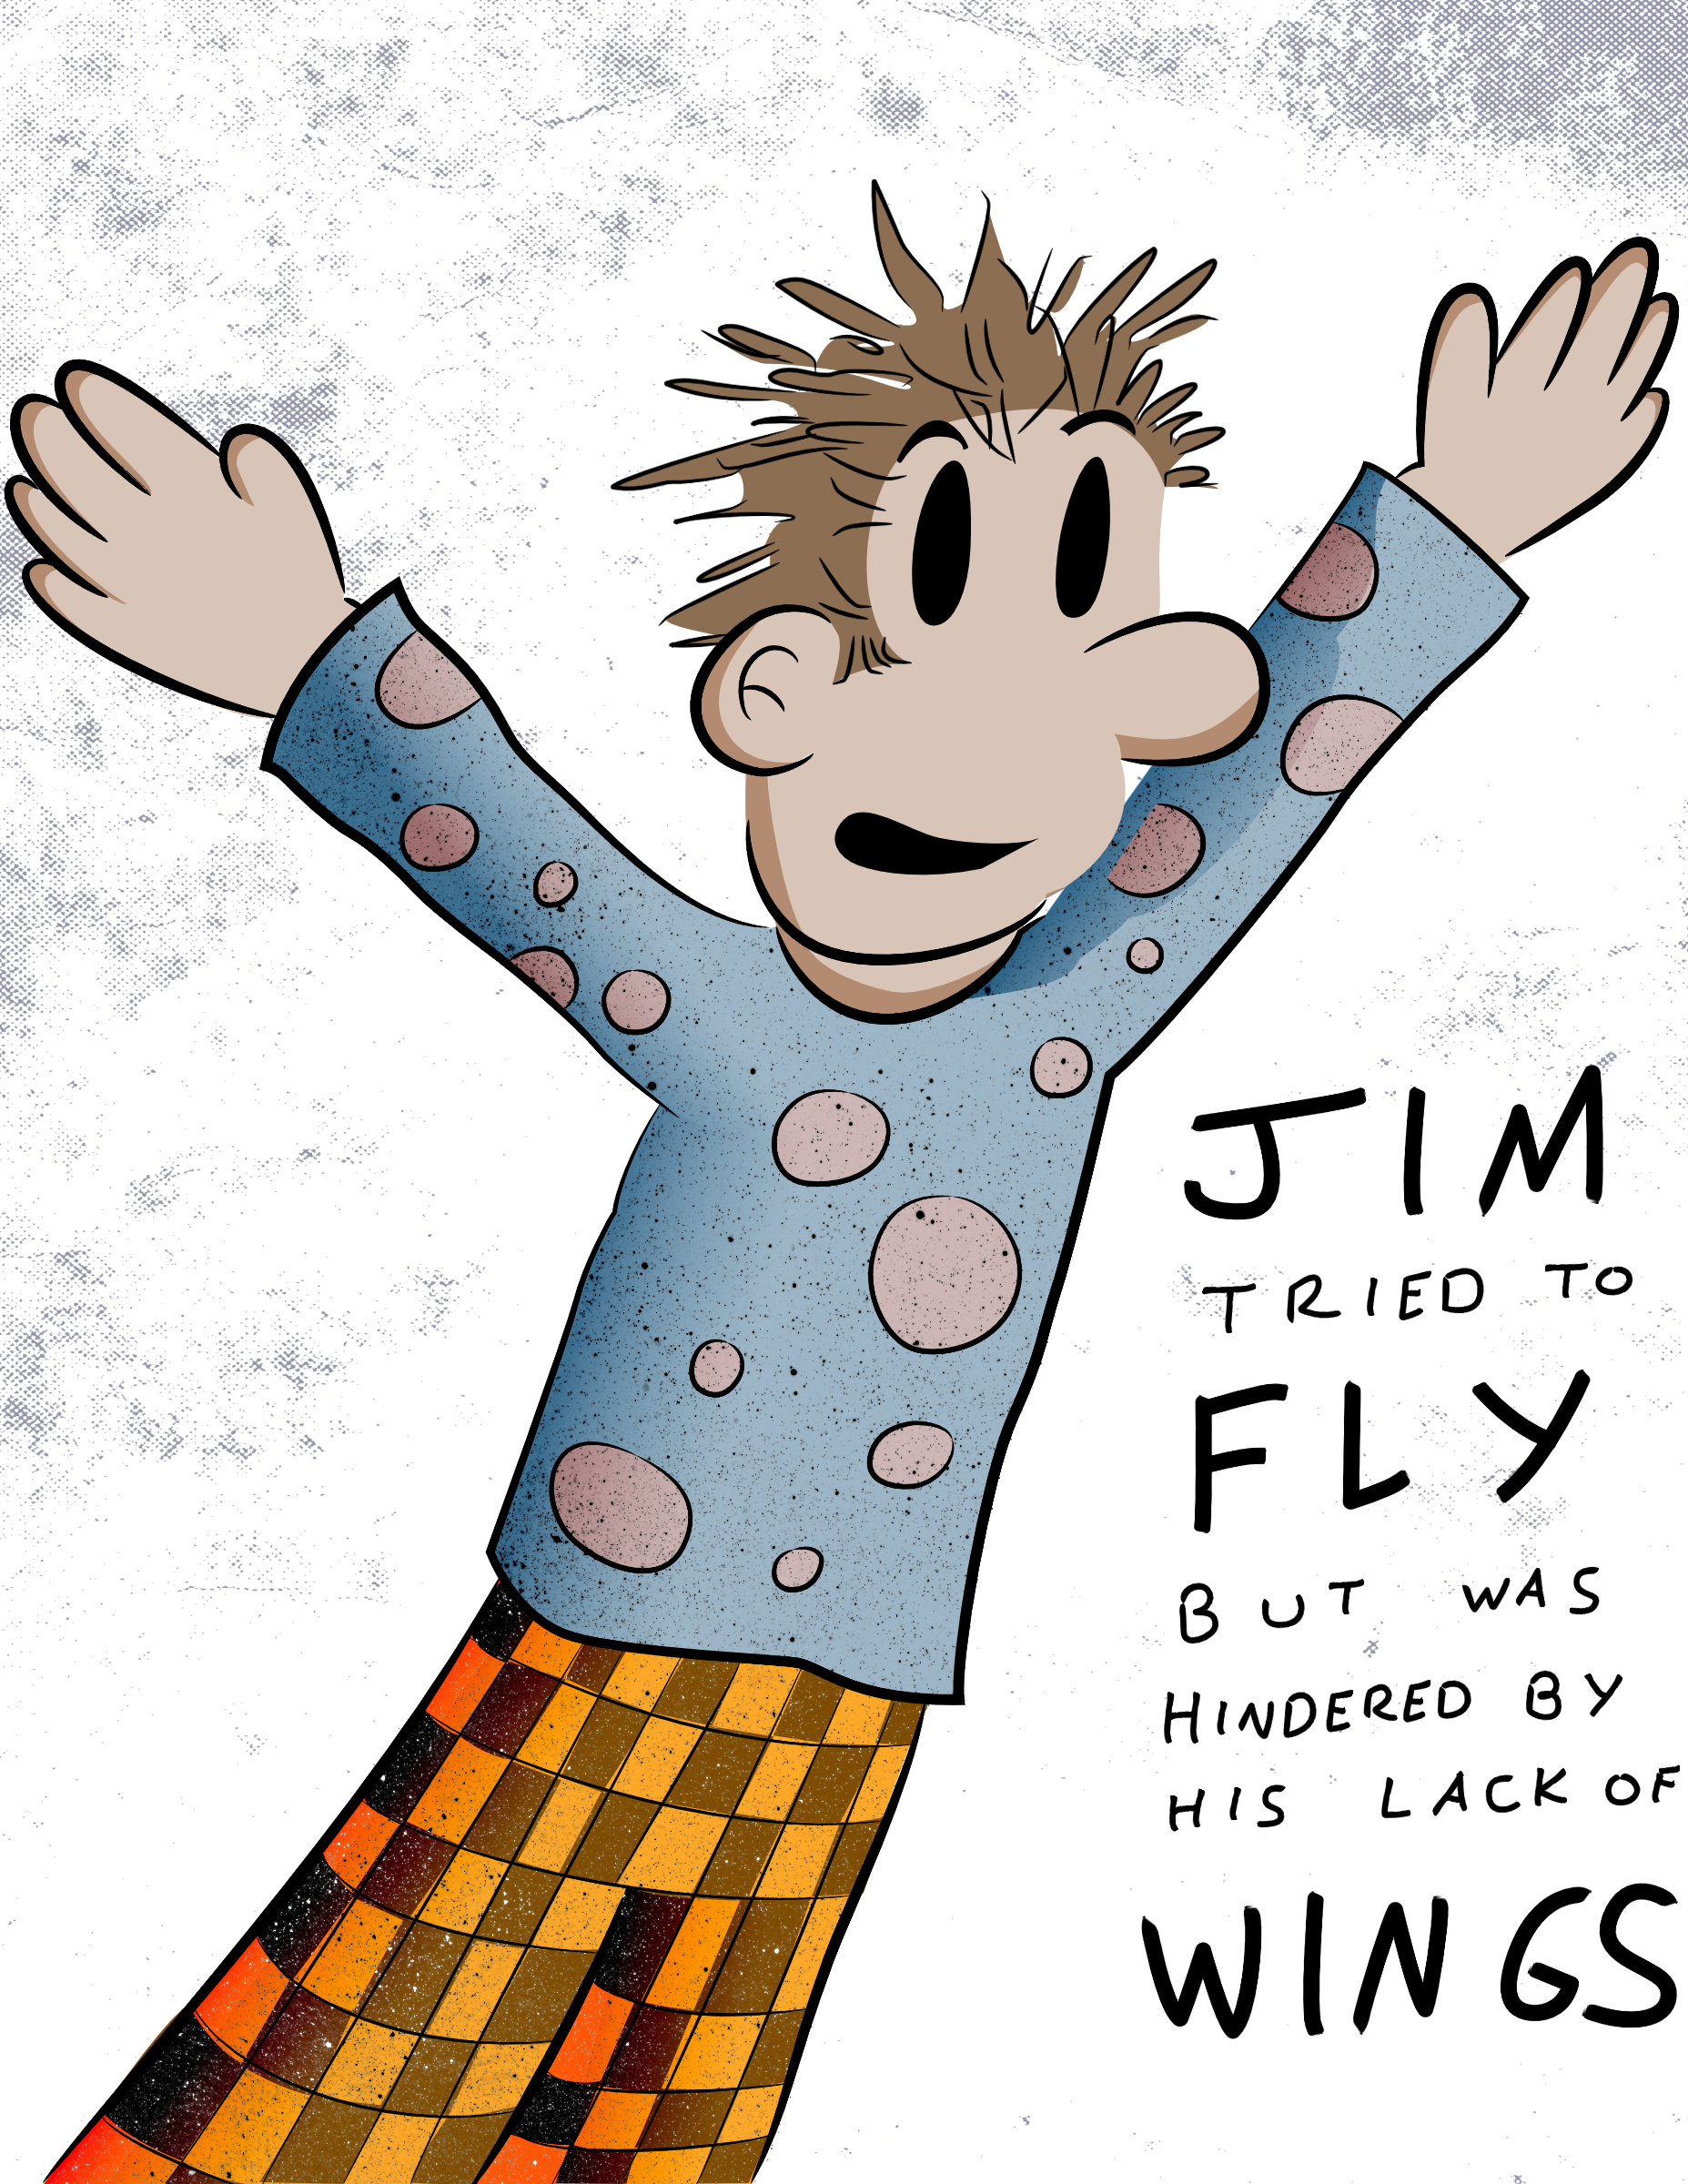 Jim Tried To Fly